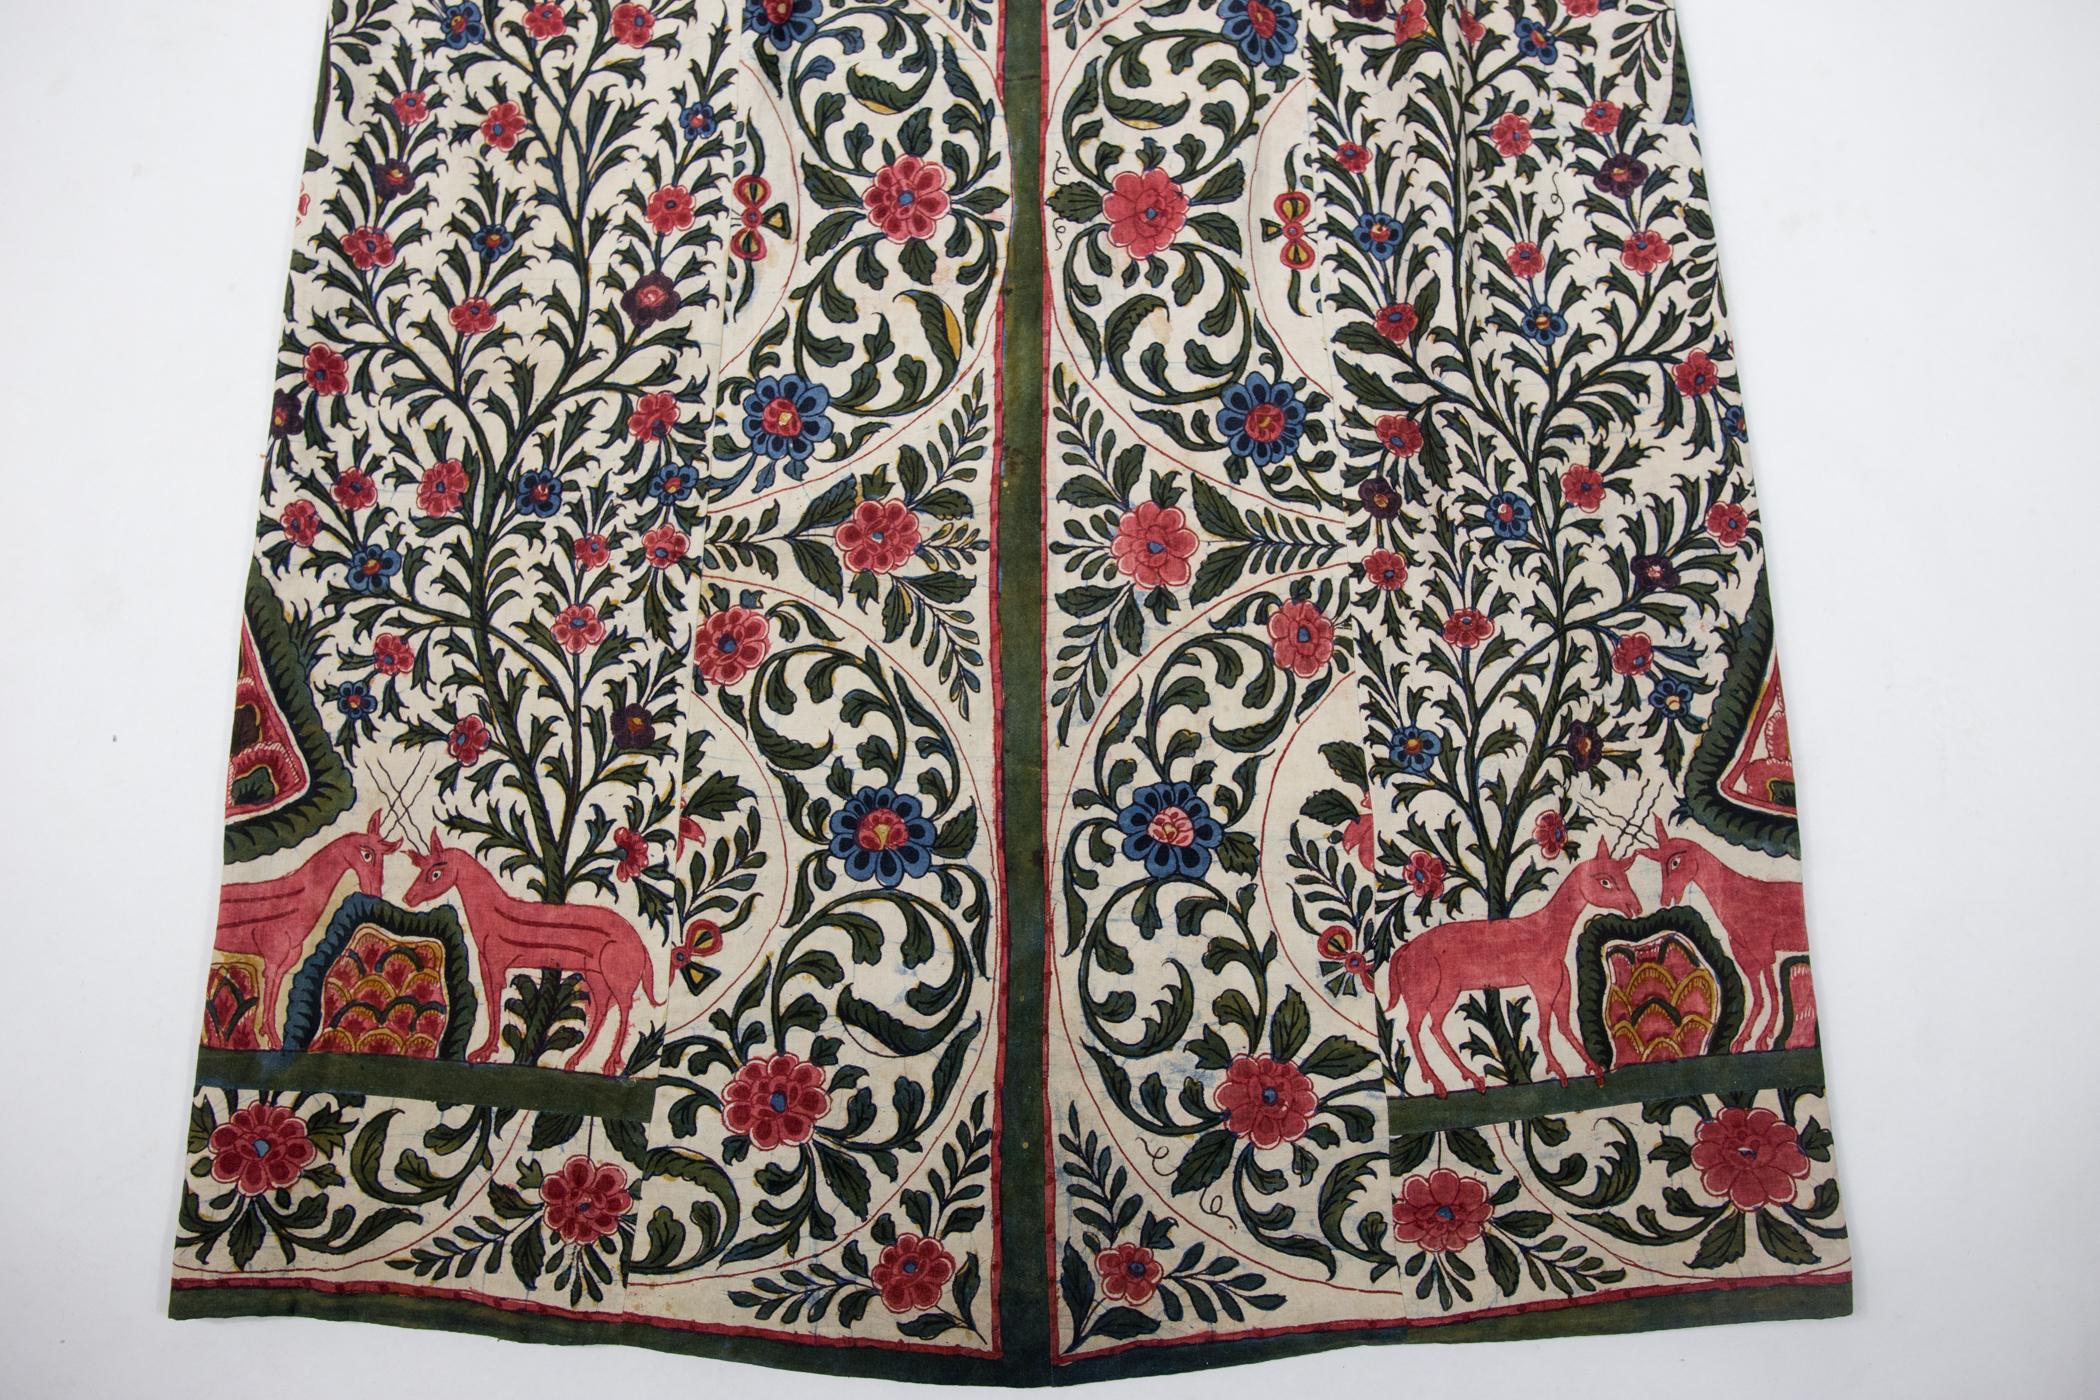  An Indian Painted Chintz Kaftan Dress From a Tree of Life Hanging Circa 1830 6